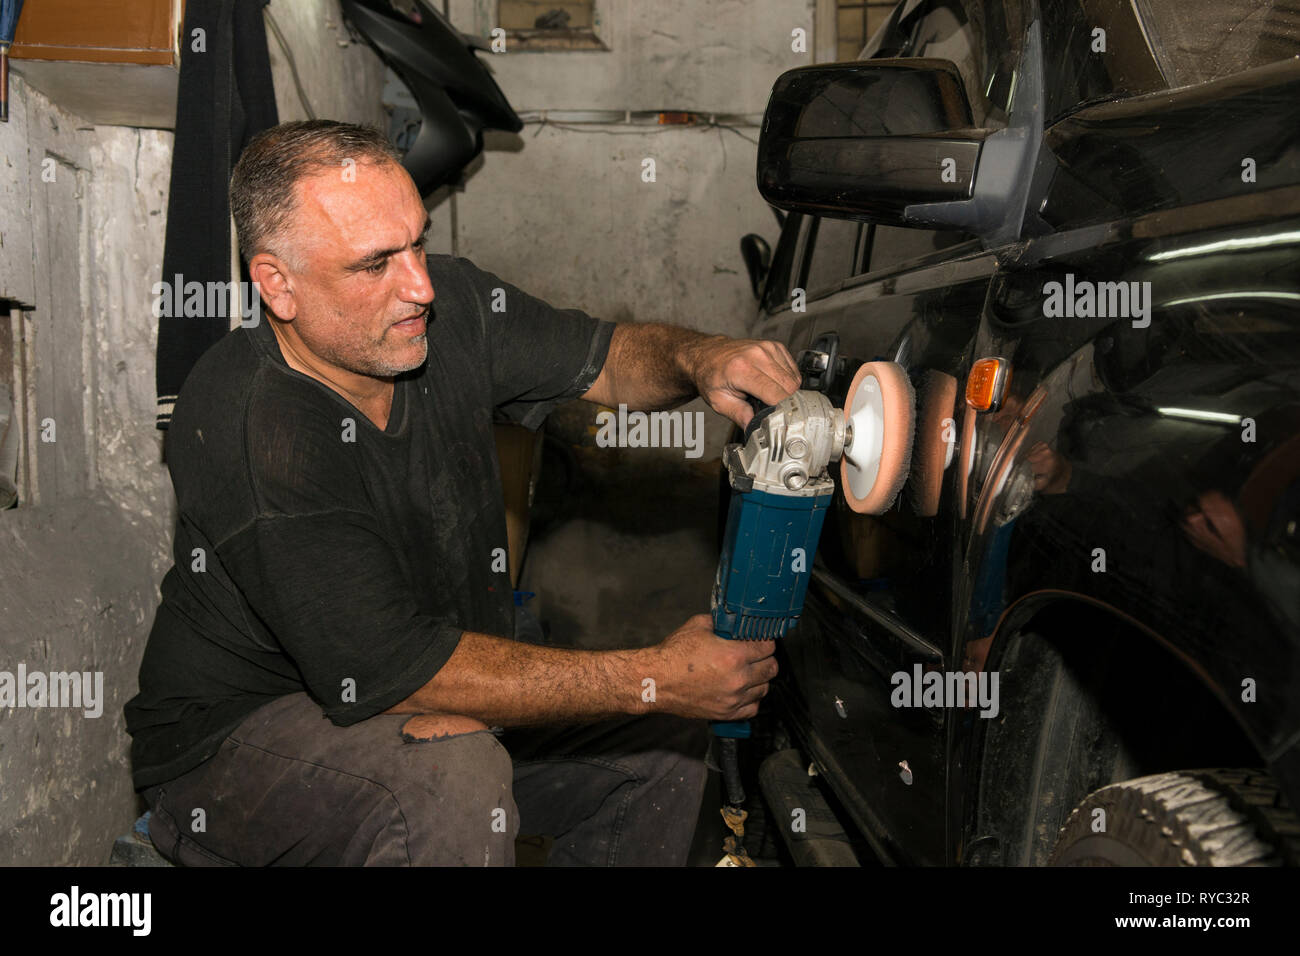 Man working with a grinding machine on car paint Stock Photo